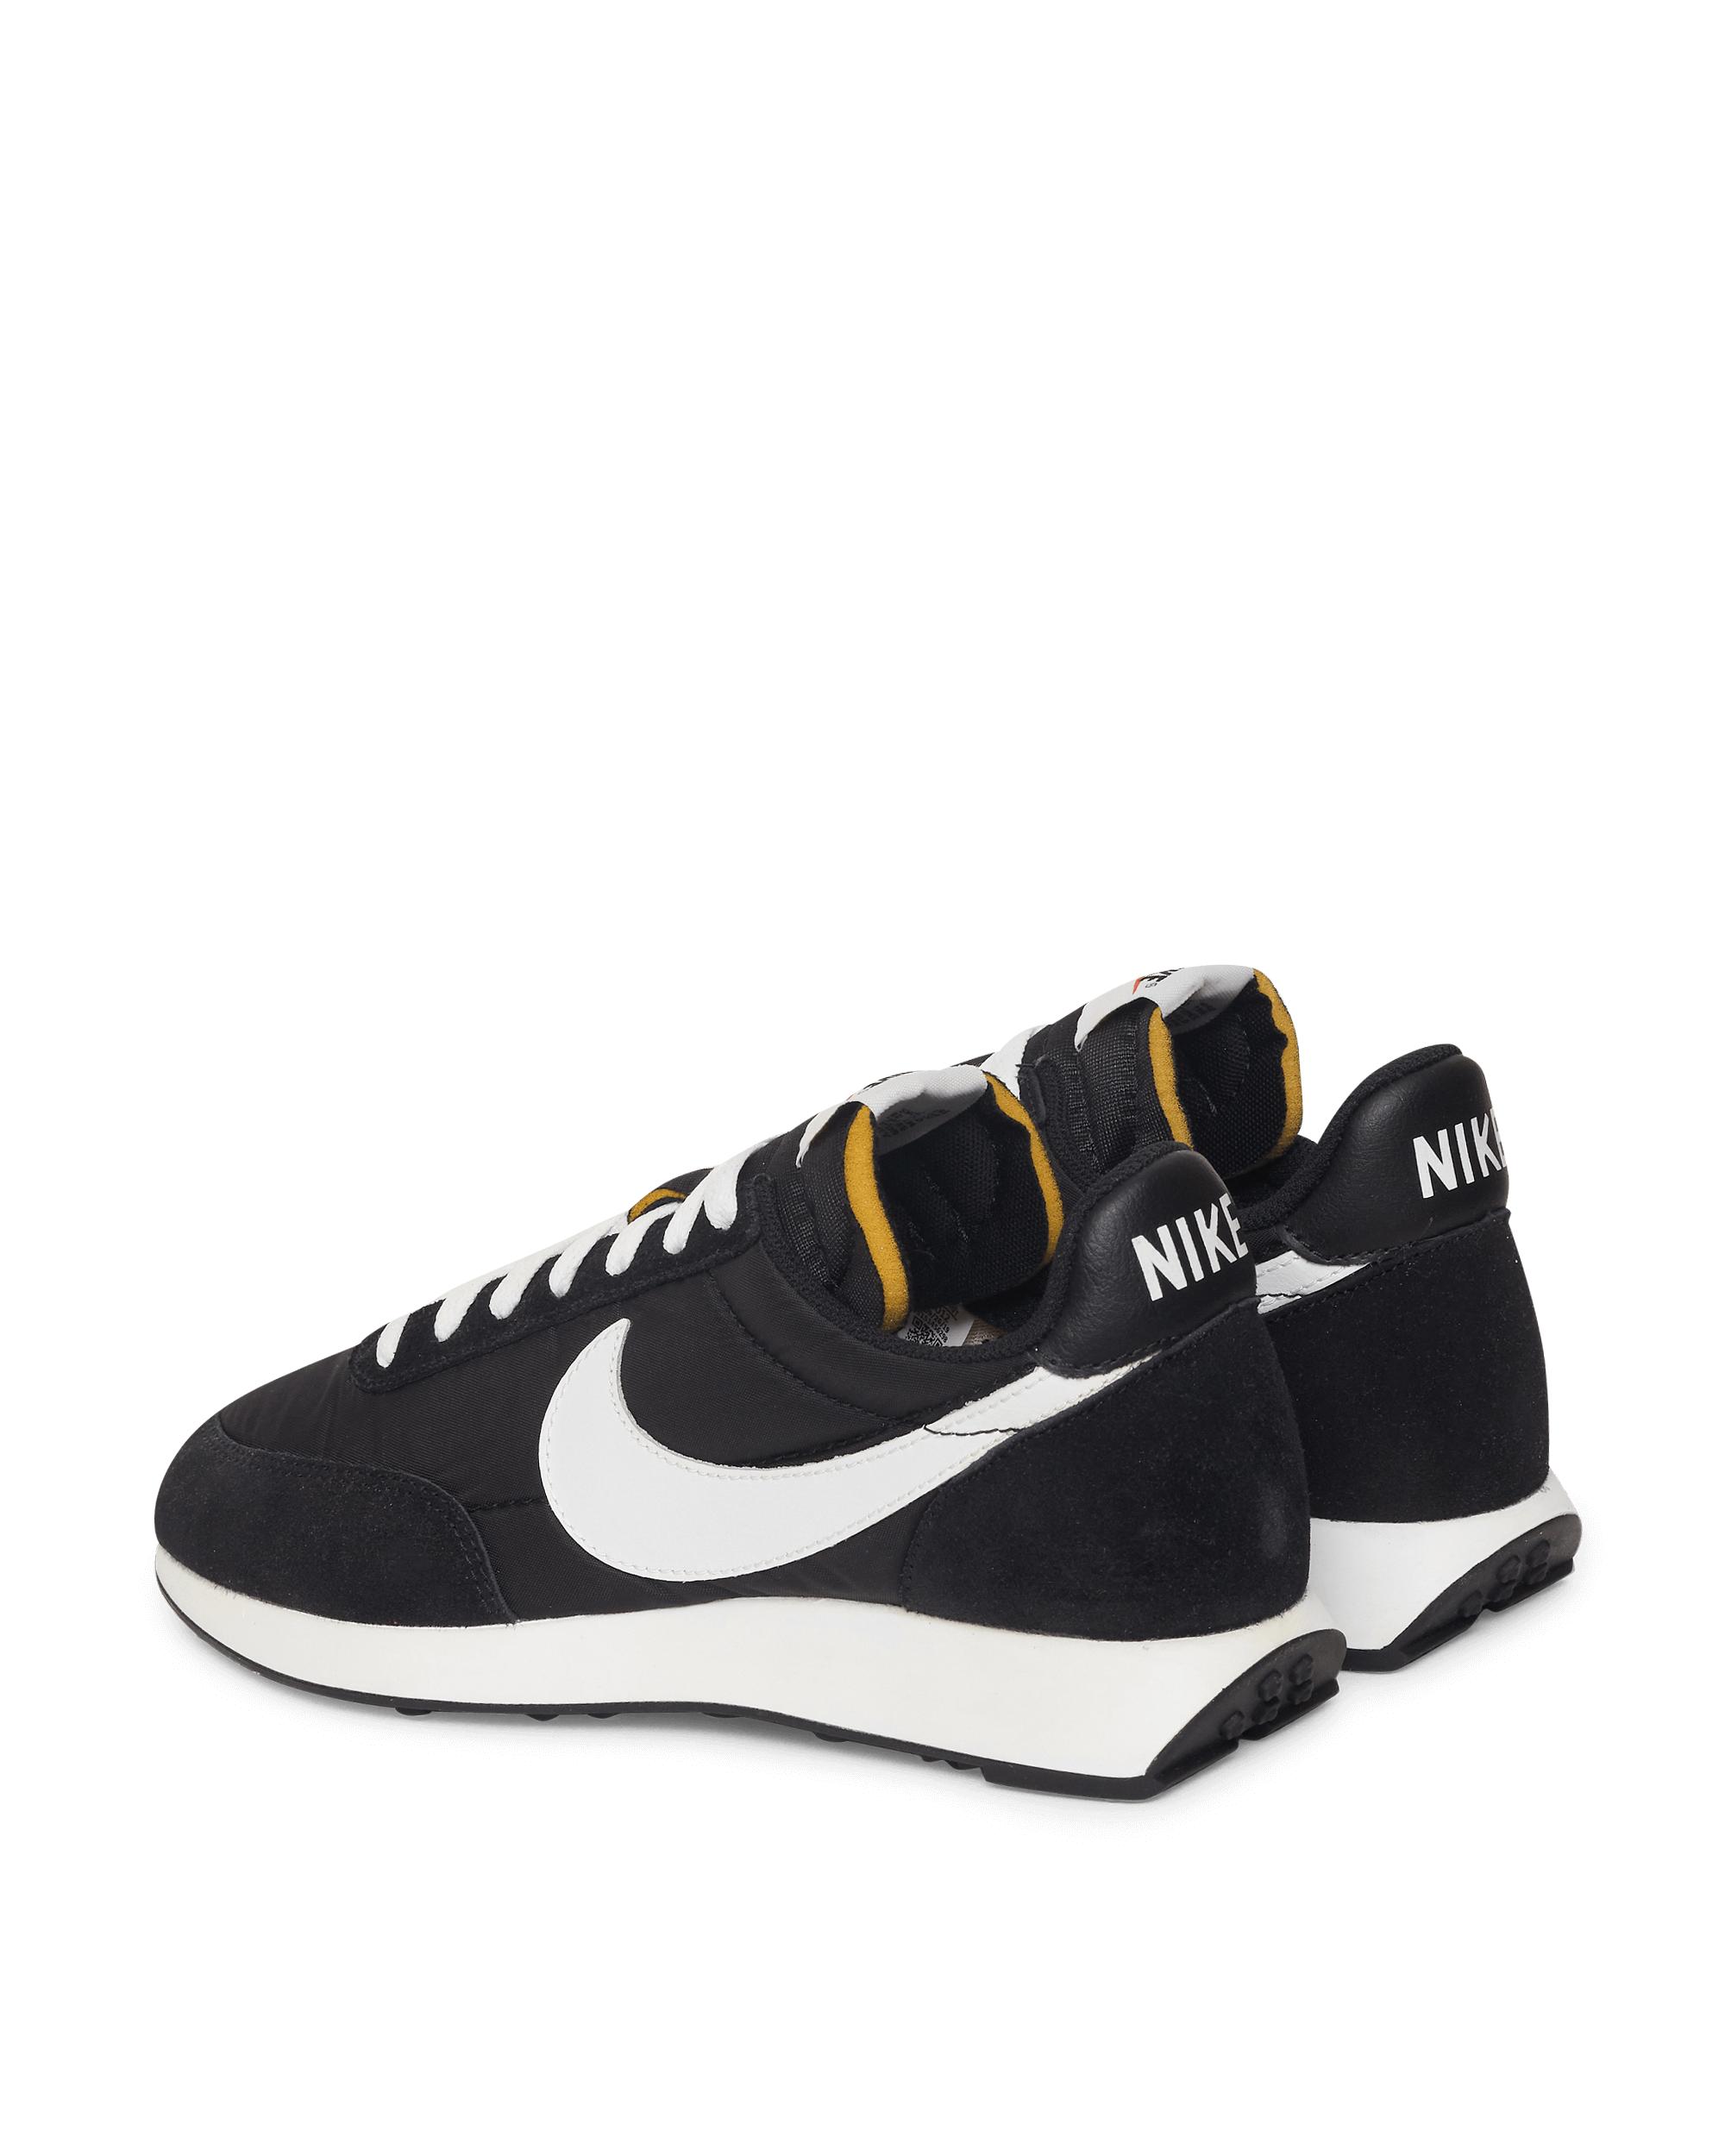 Nike Synthetic Air Tailwind '79 - Shoes in Black/White (Black) for ... ابرة سحب